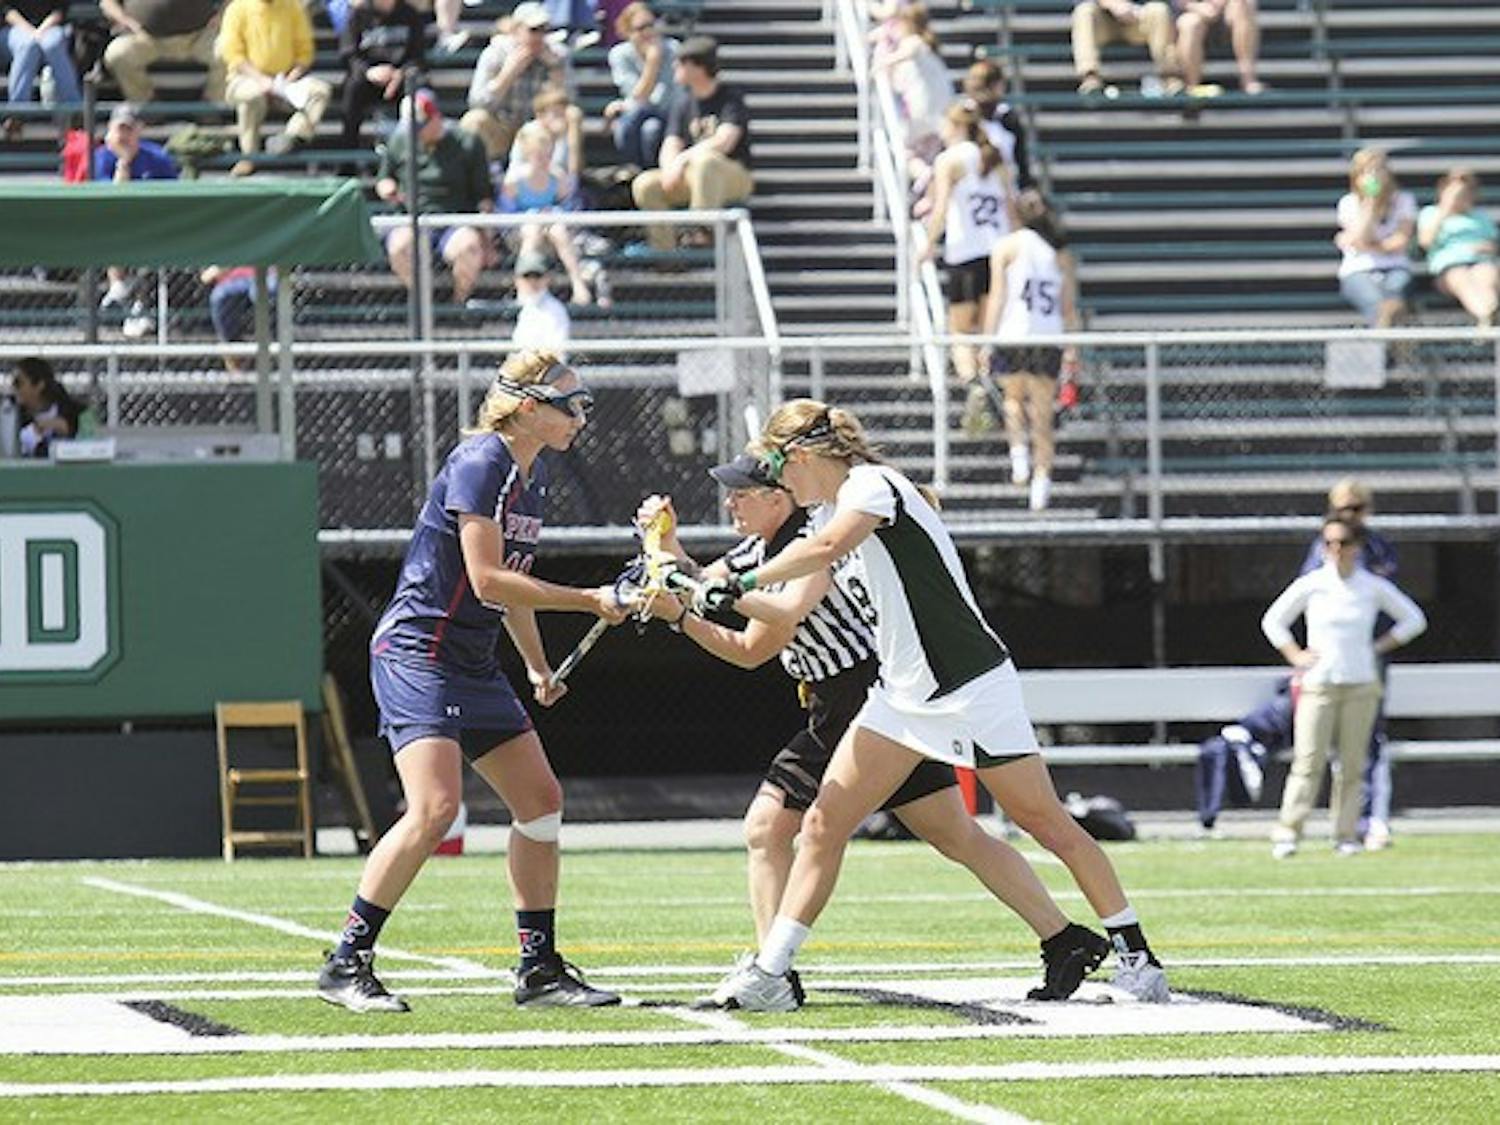 Women's lacrosse captain Sarah Plumb '12 led her team to an Ivy League Championship last weekend.